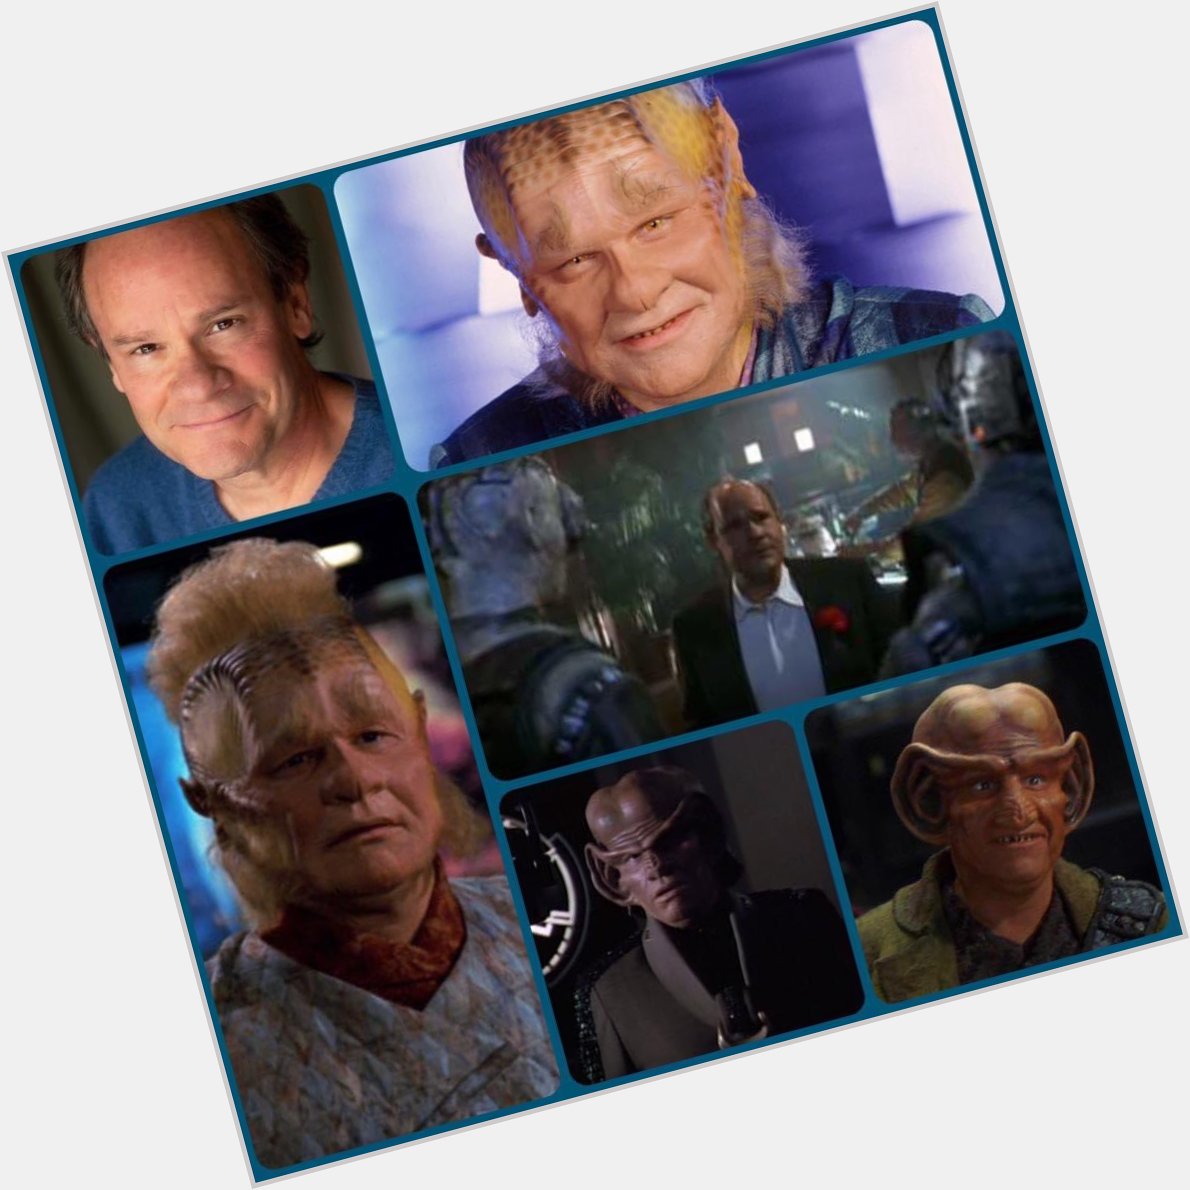  Happy birthday to actor Ethan Phillips who played the role of Neelix on Star Trek Voyager!! 